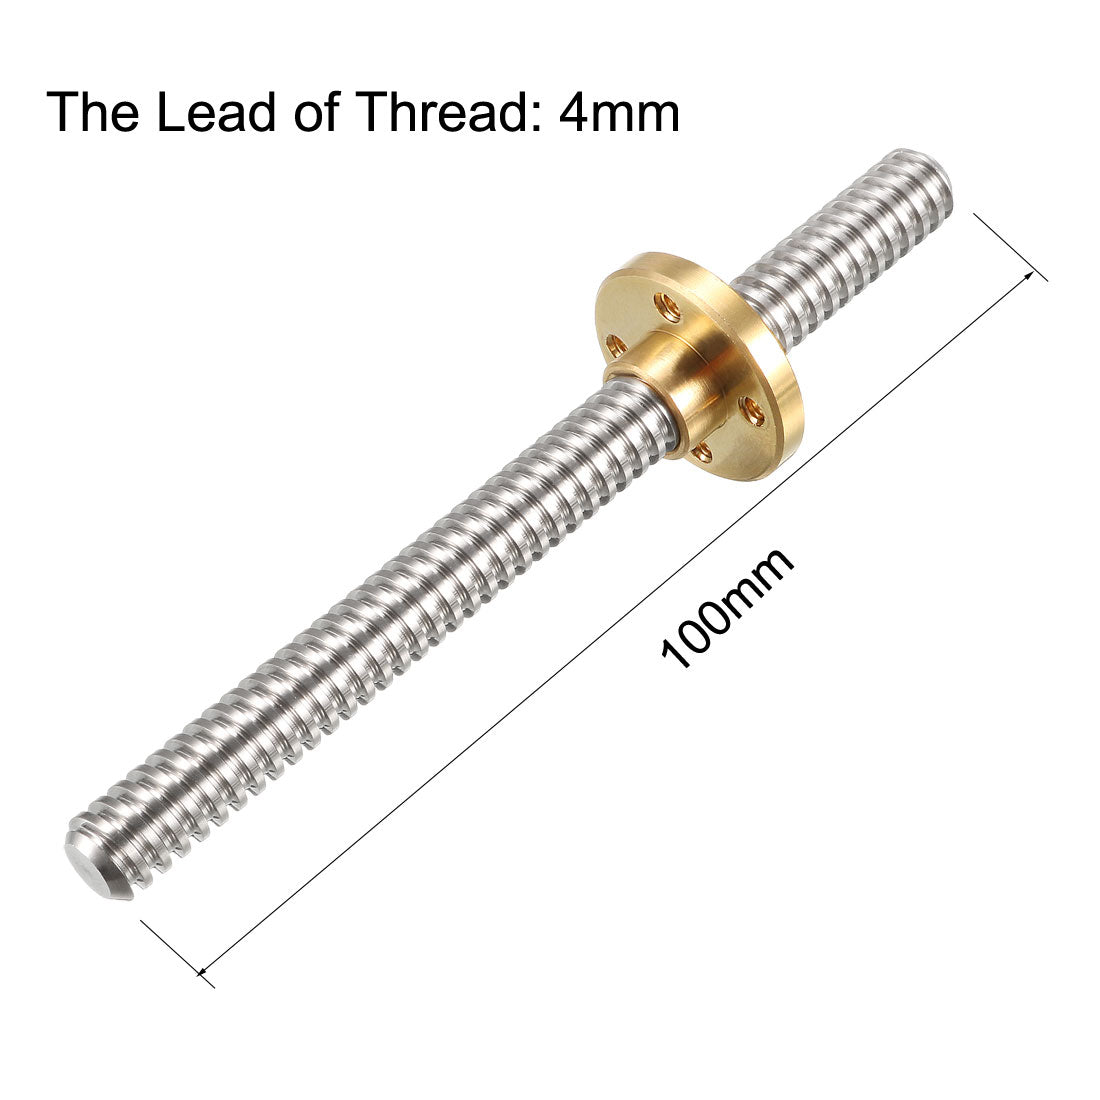 uxcell Uxcell 2PCS 100mm T8 Pitch 2mm Lead 4mm Lead Screw Rod with Copper Nut for 3D Printer